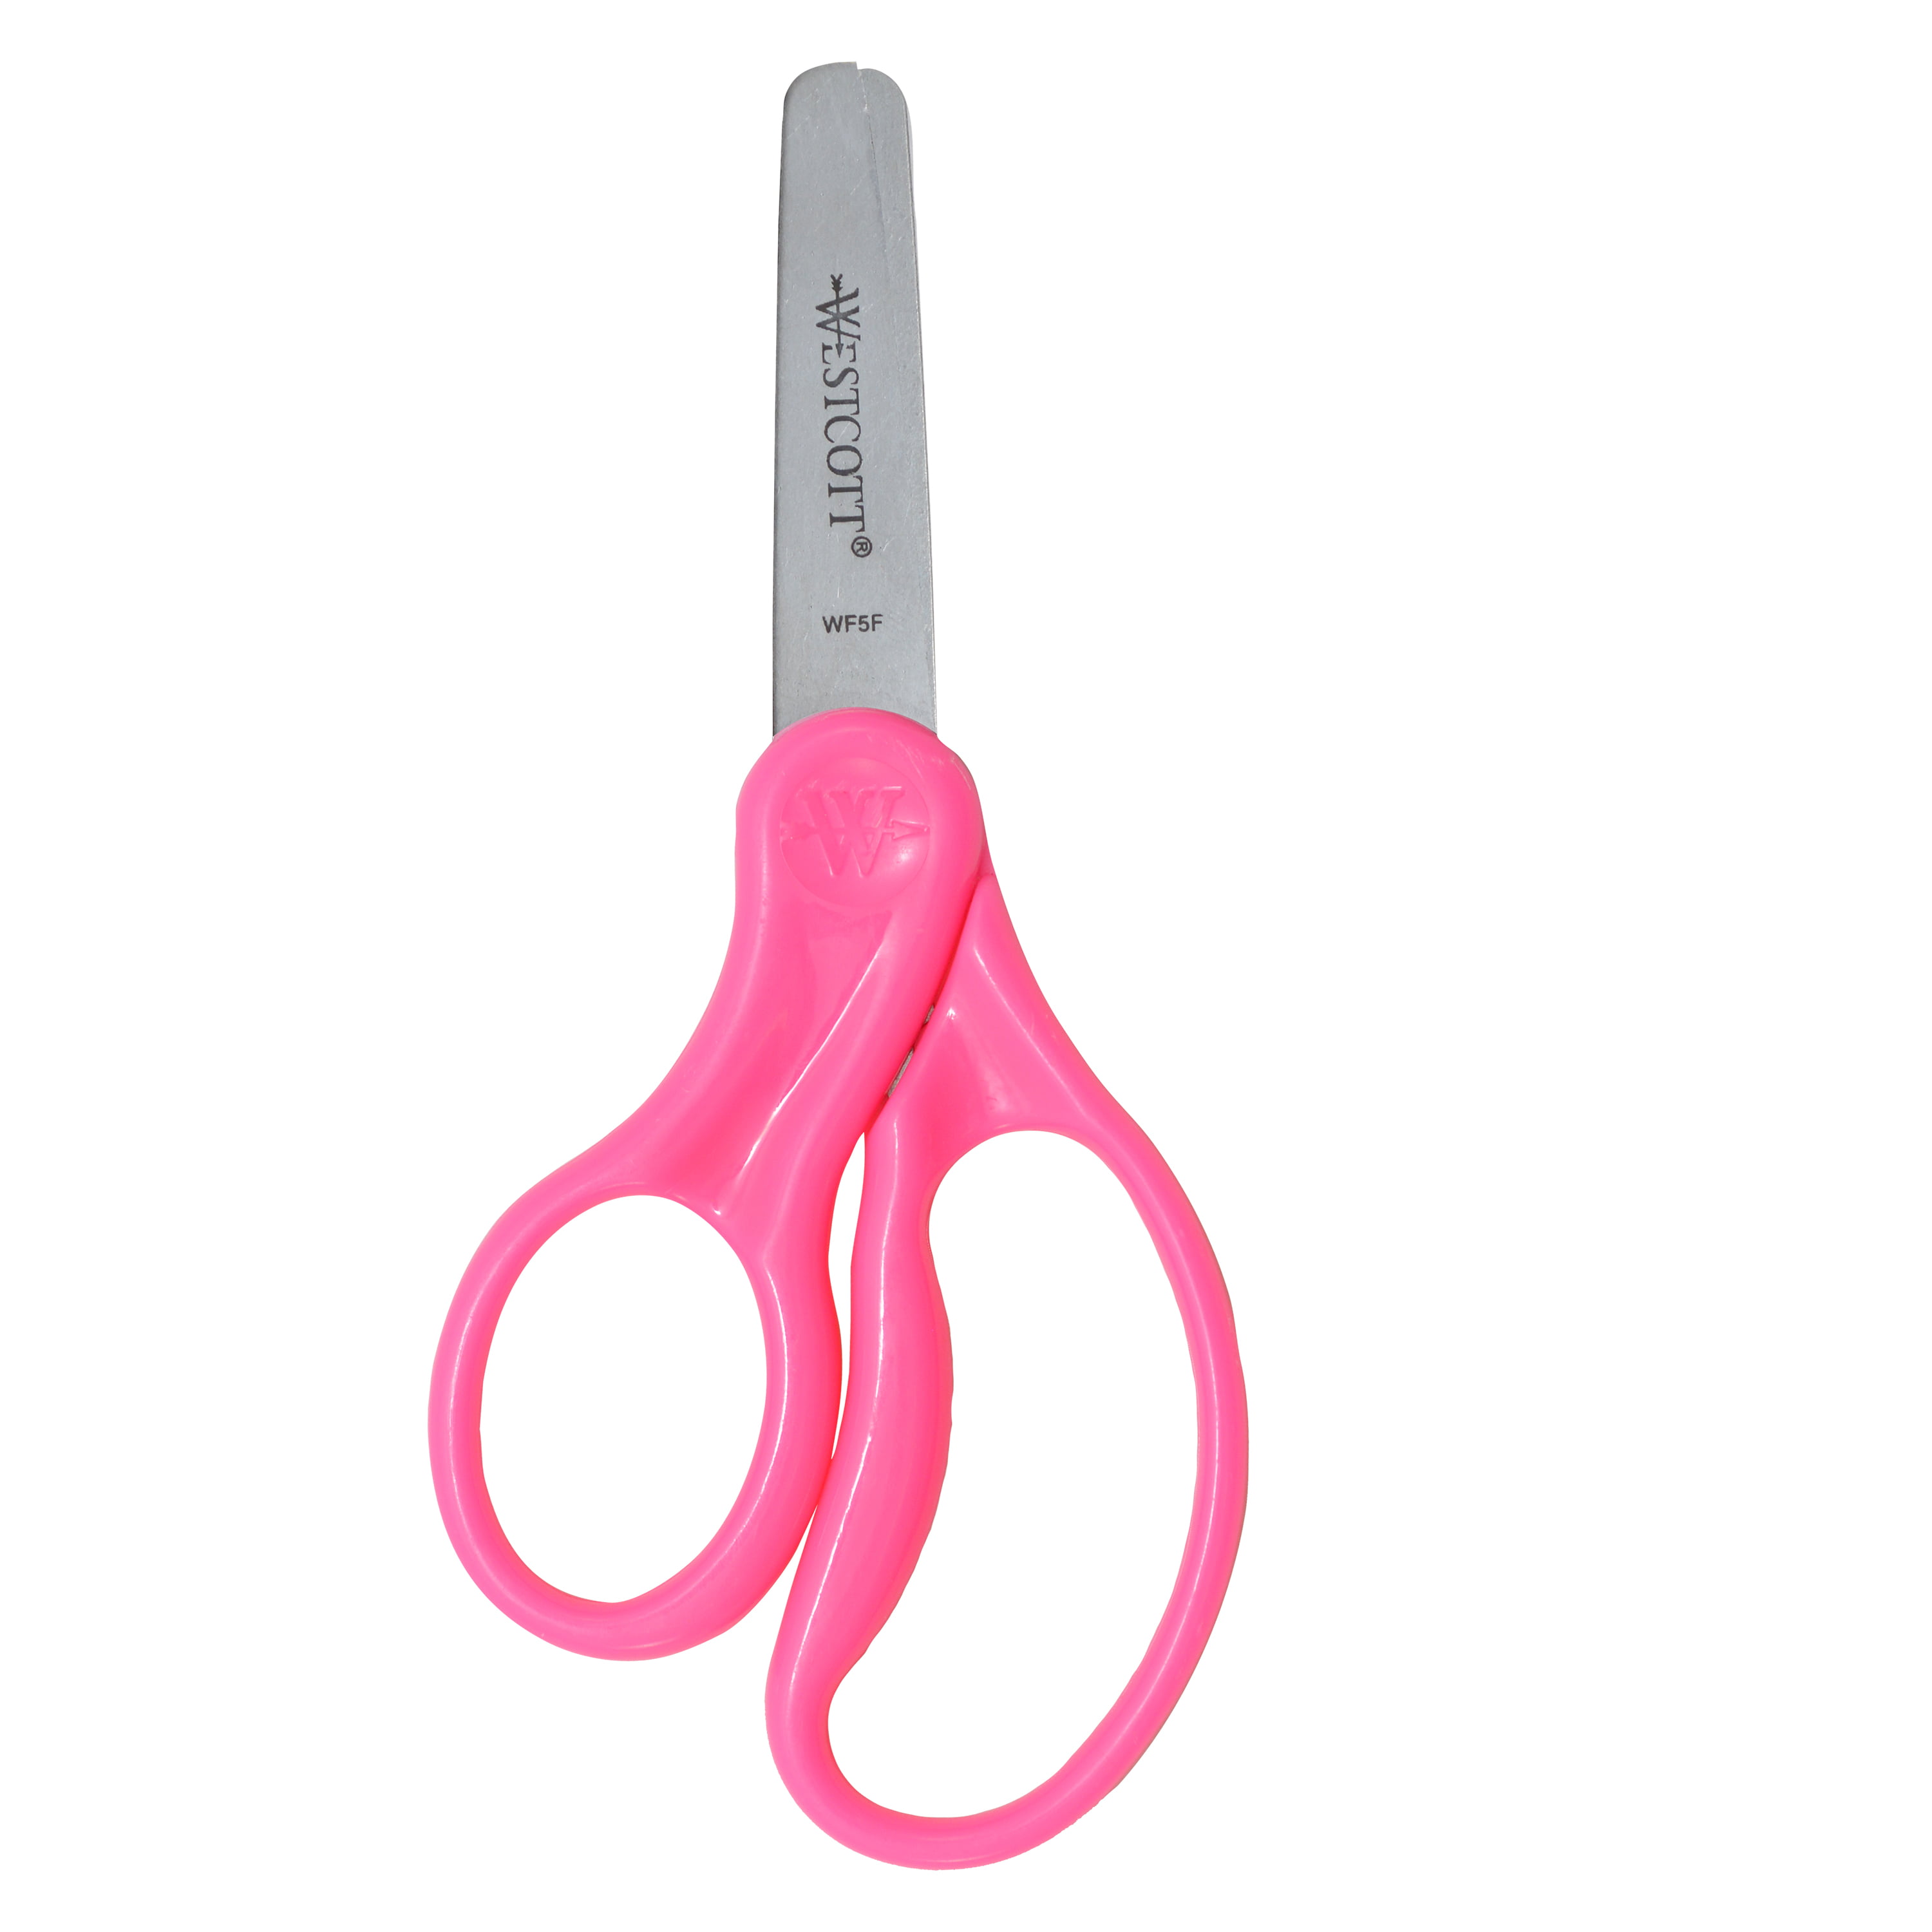 Adapted Scissors, 45 mm Round Blunt Tips, 45mm Round, Left-Handed